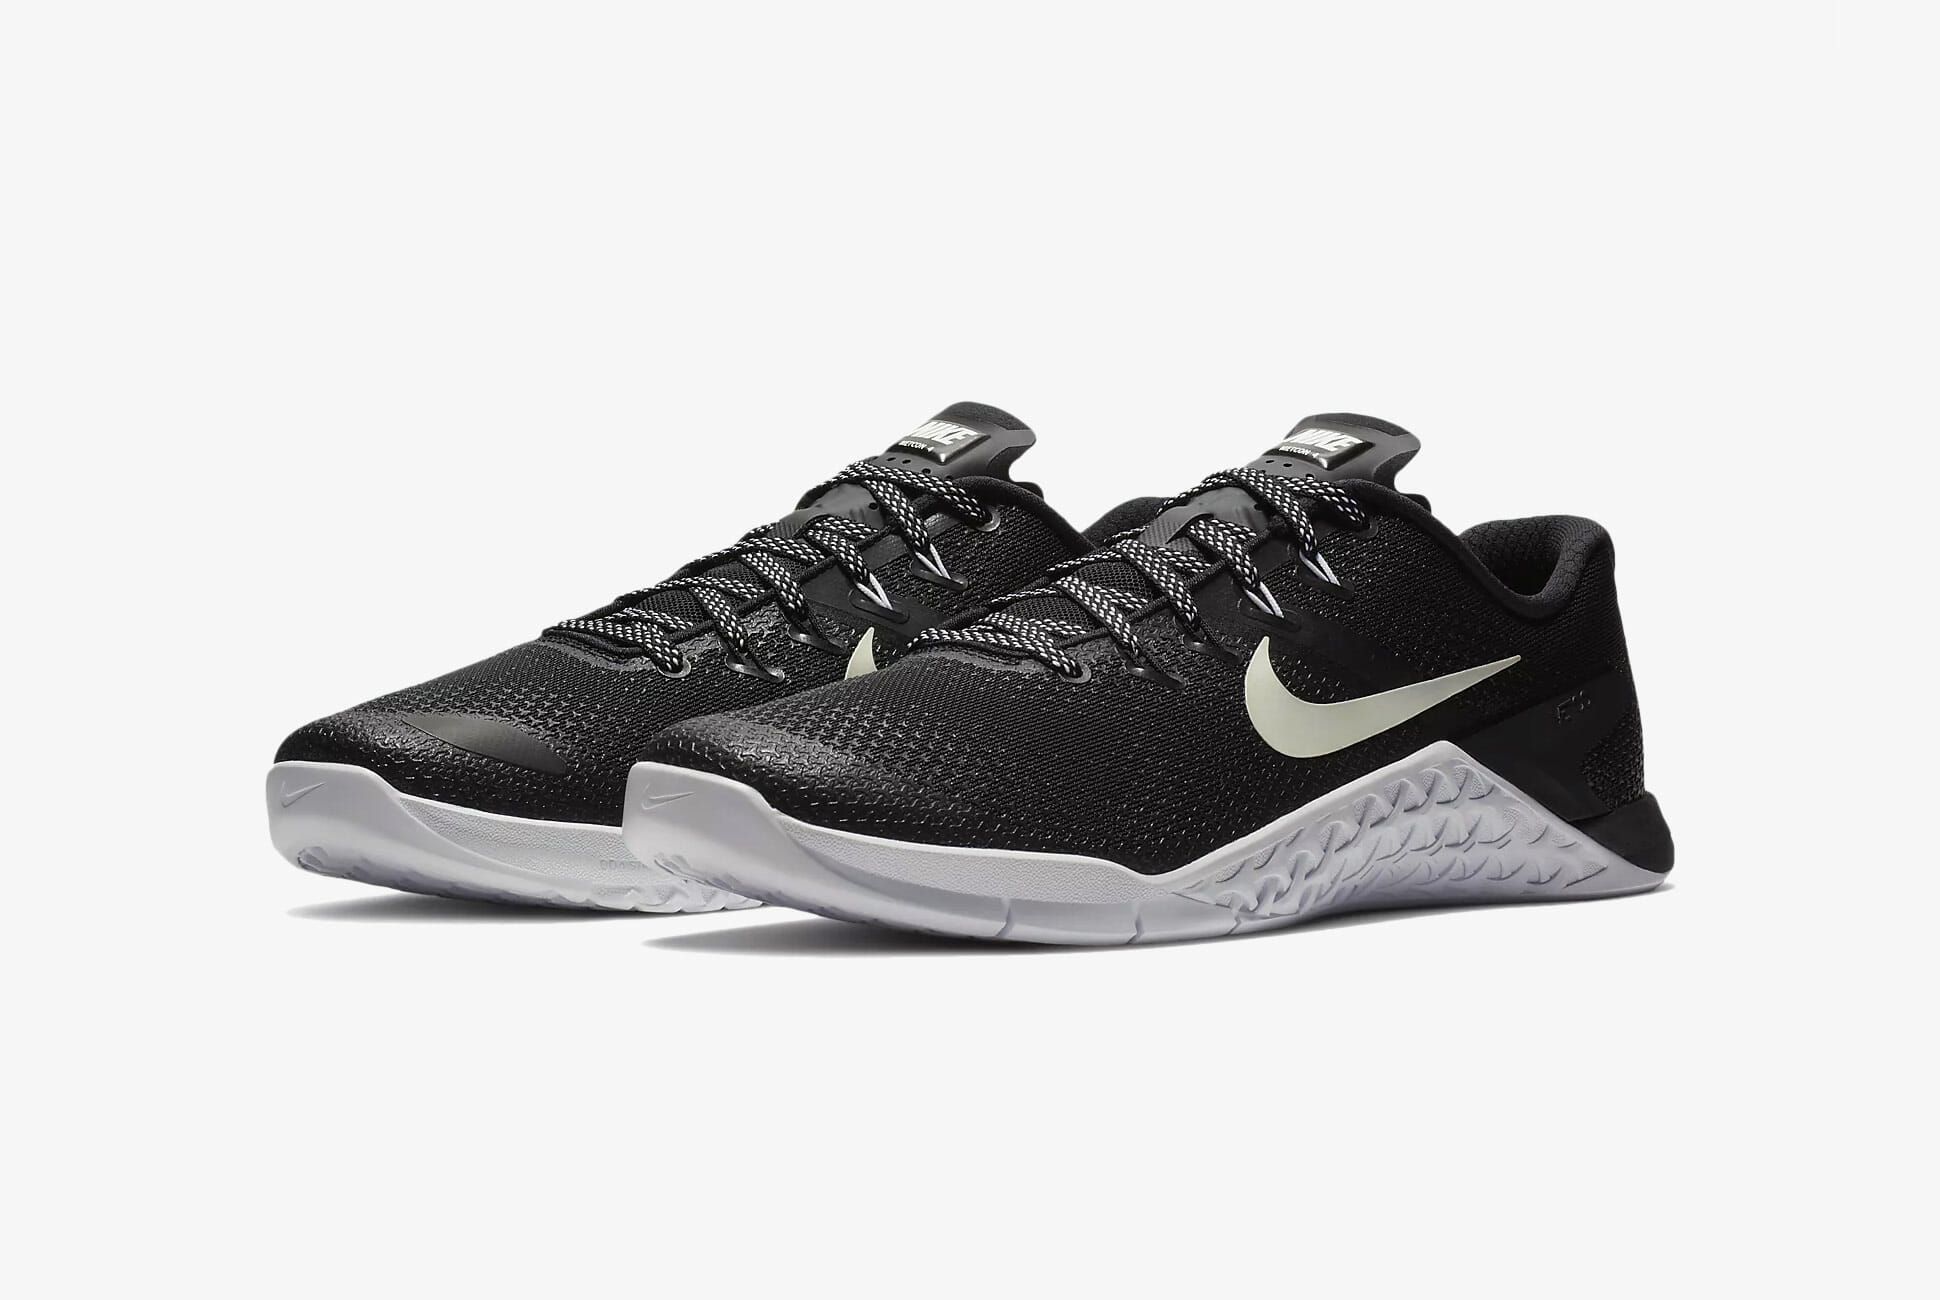 One of the Best Nike Gym Sneakers Is $40 Off Today